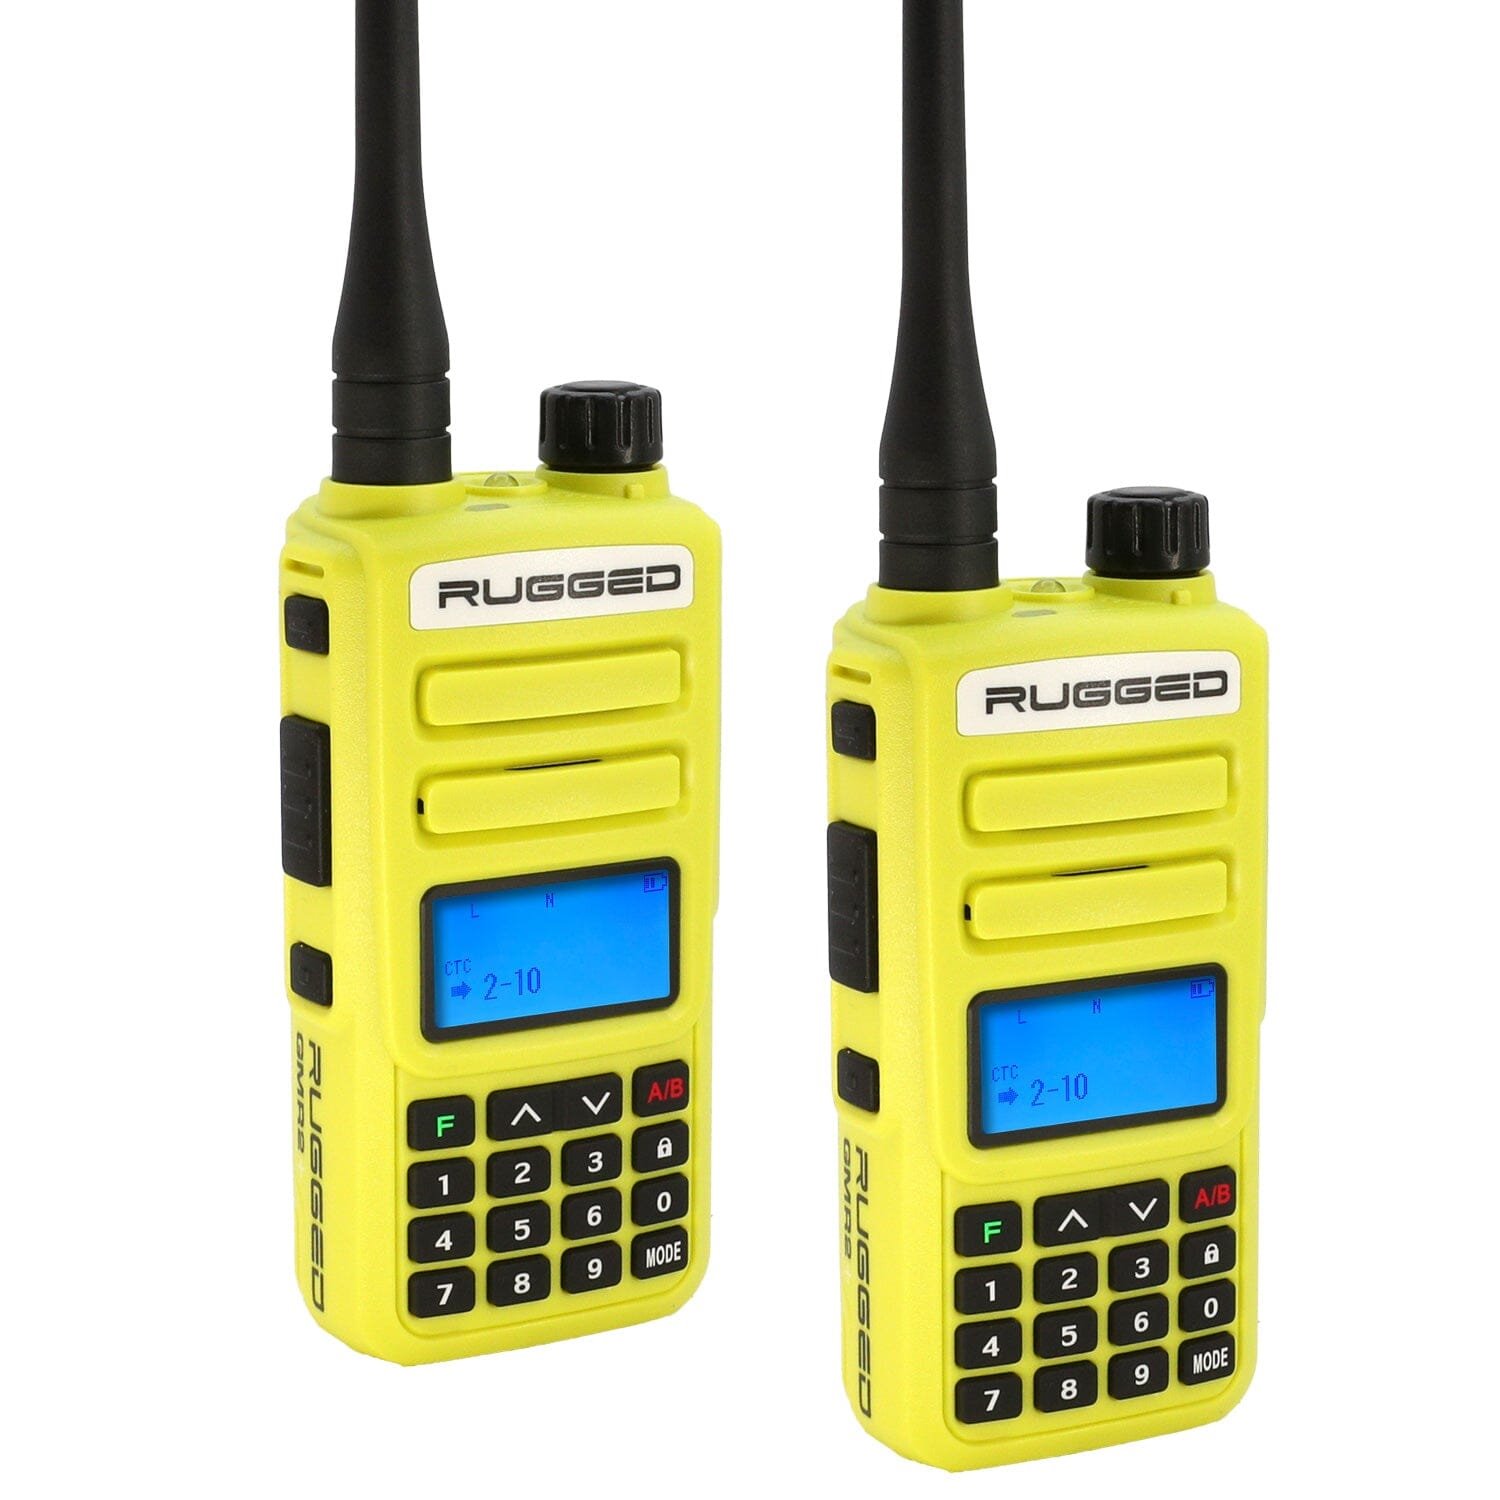 GMR2-PLUS-2-PACK-HV Rugged GMR2 PLUS GMRS & FRS Two-Way Handheld Radios, High-Visibility Safety Yellow